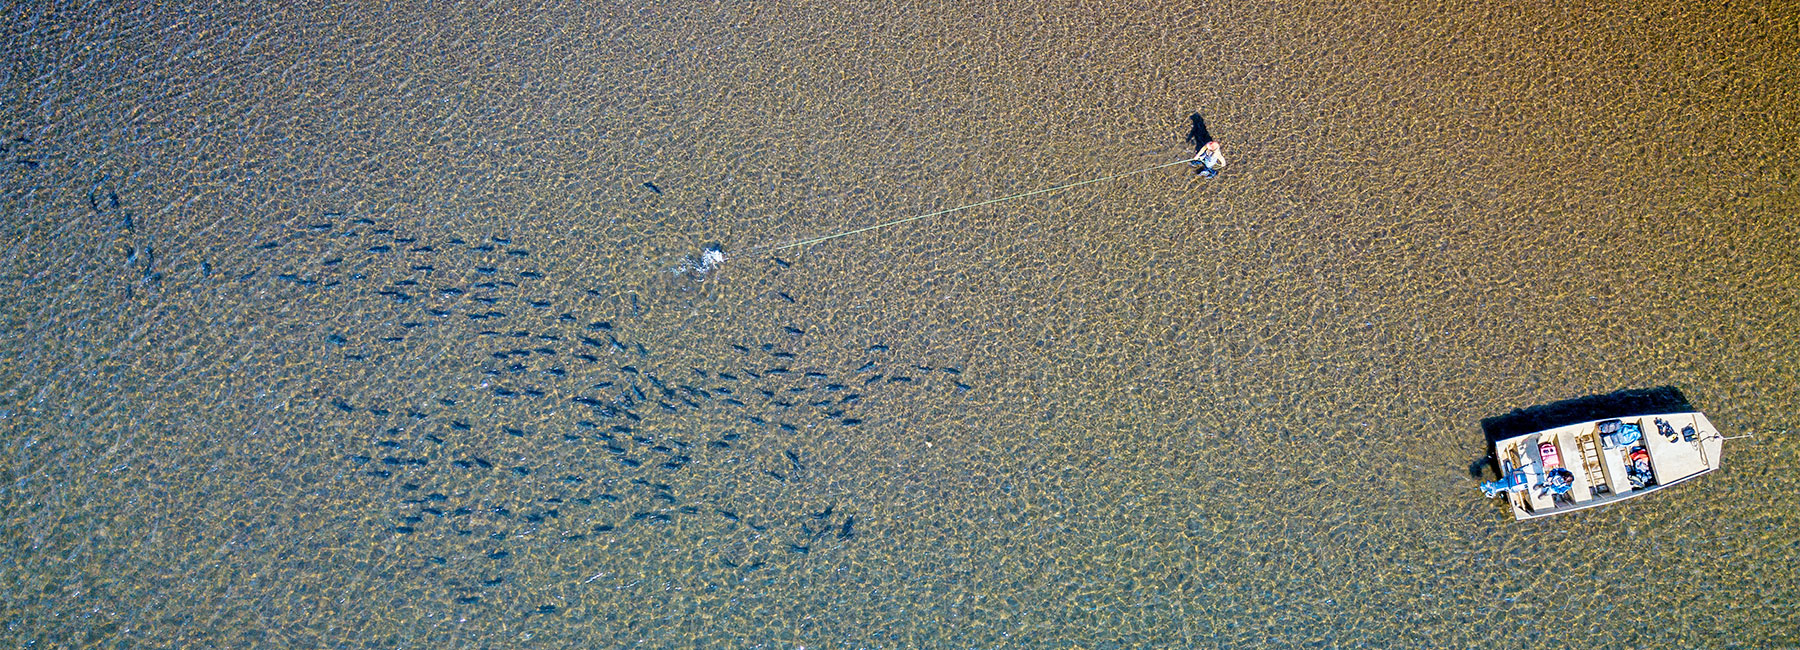 Aerial view of angler casting into a pod of silver salmon